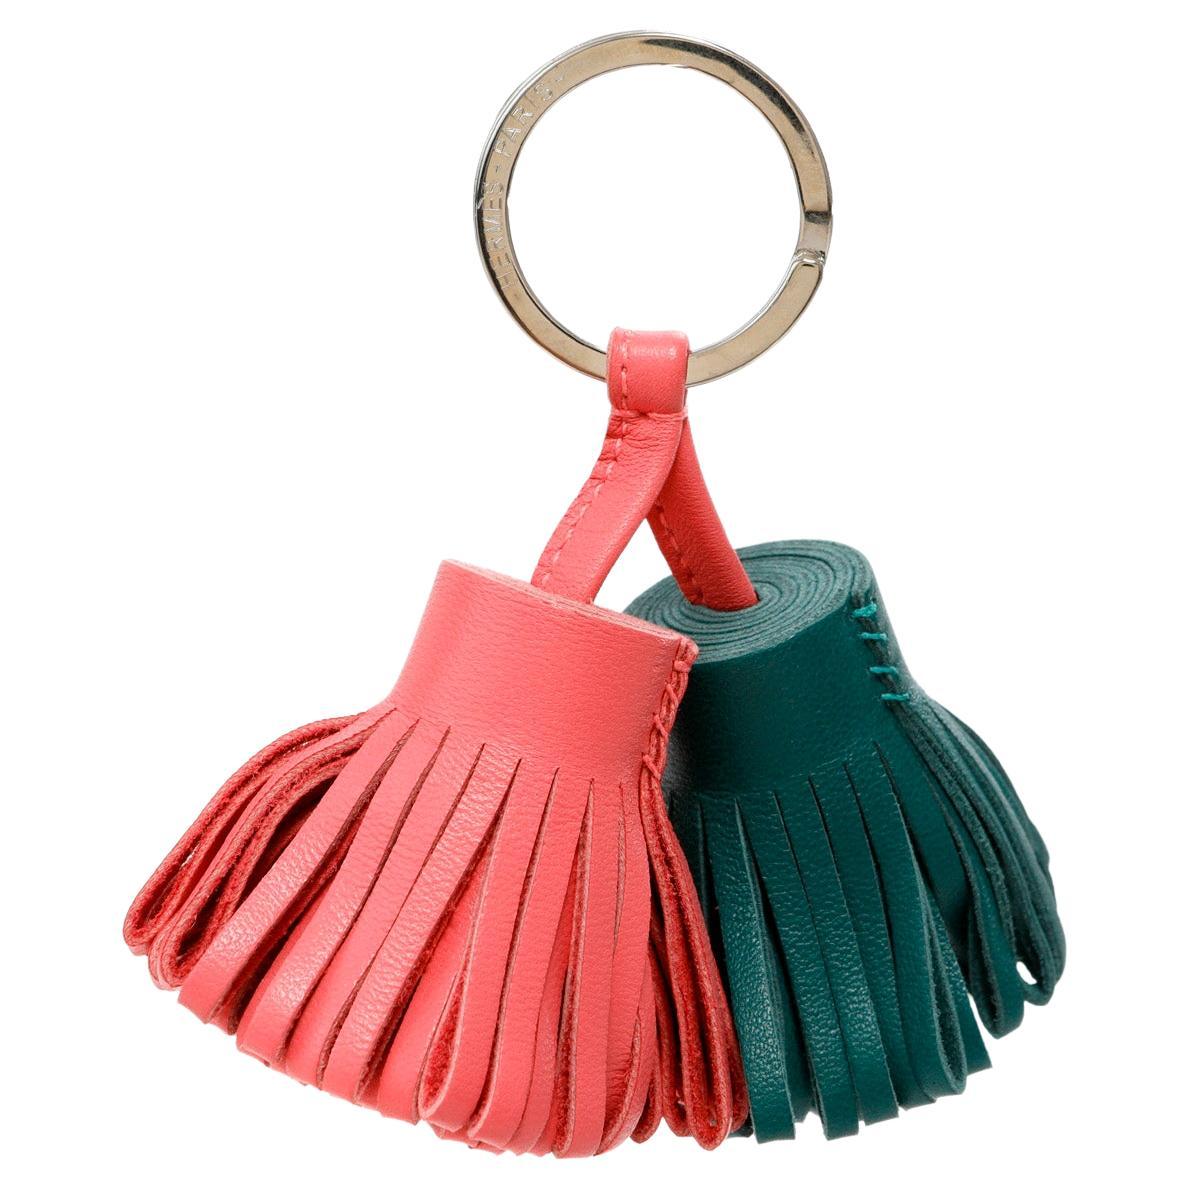 Hermès Pink and Green Leather Double Tassel Key Holder